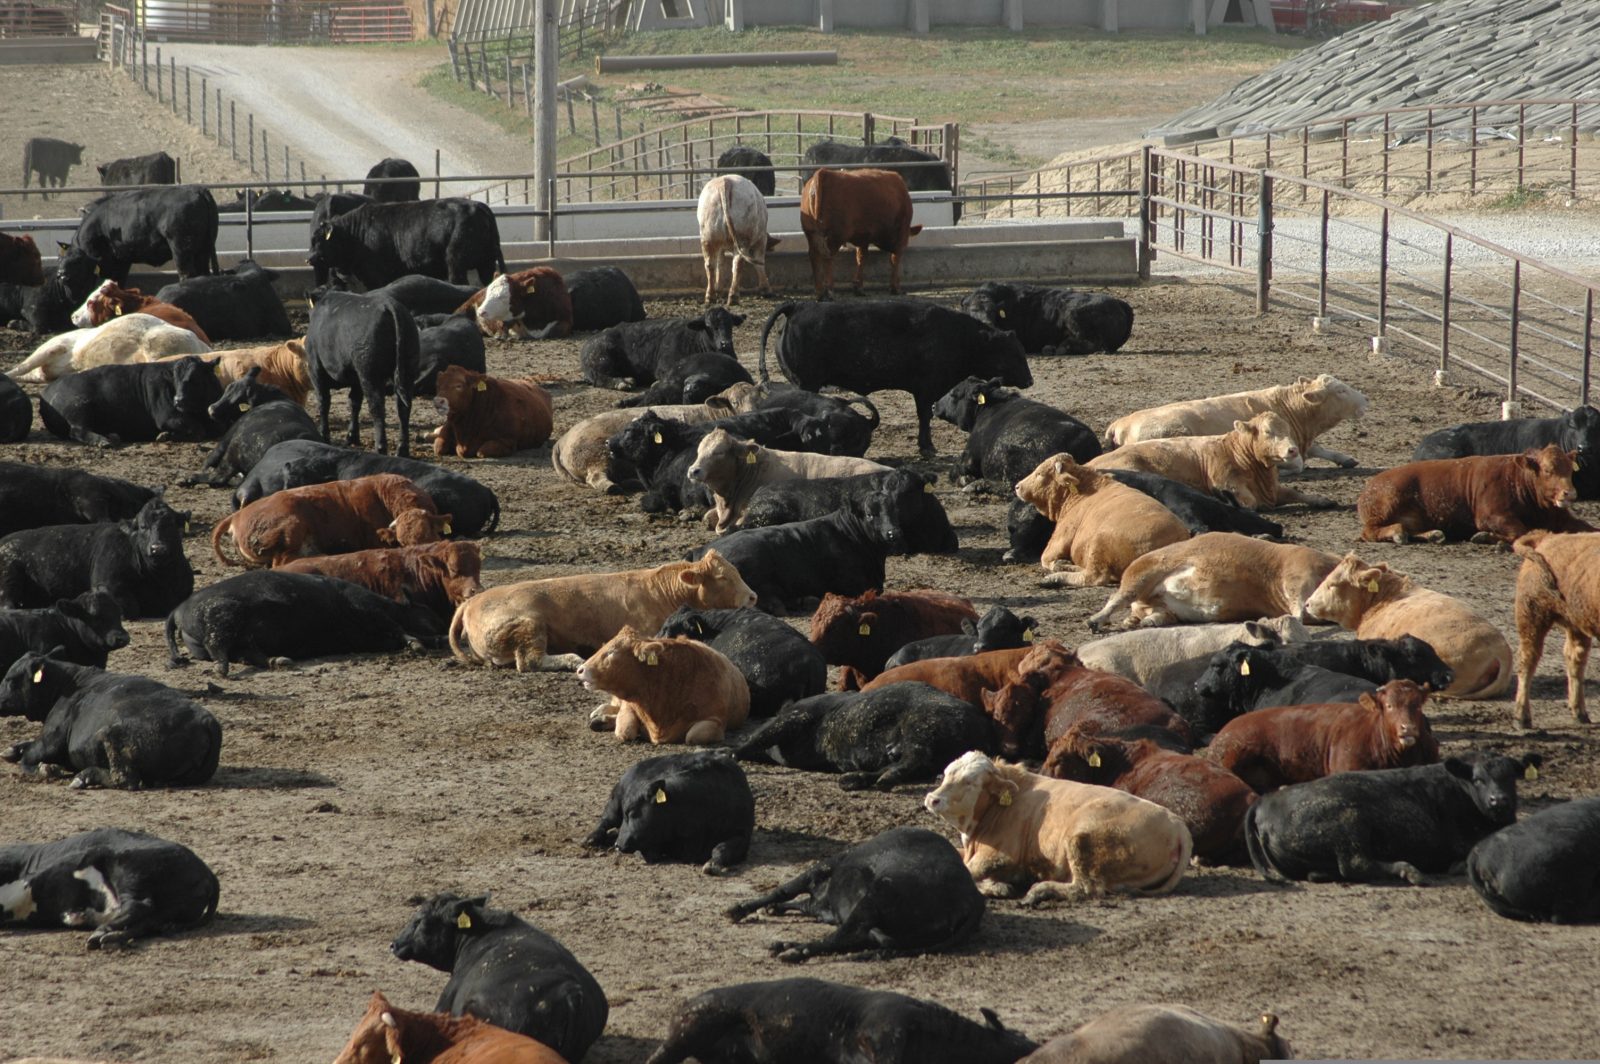 Cows on a midwestern feedlot.